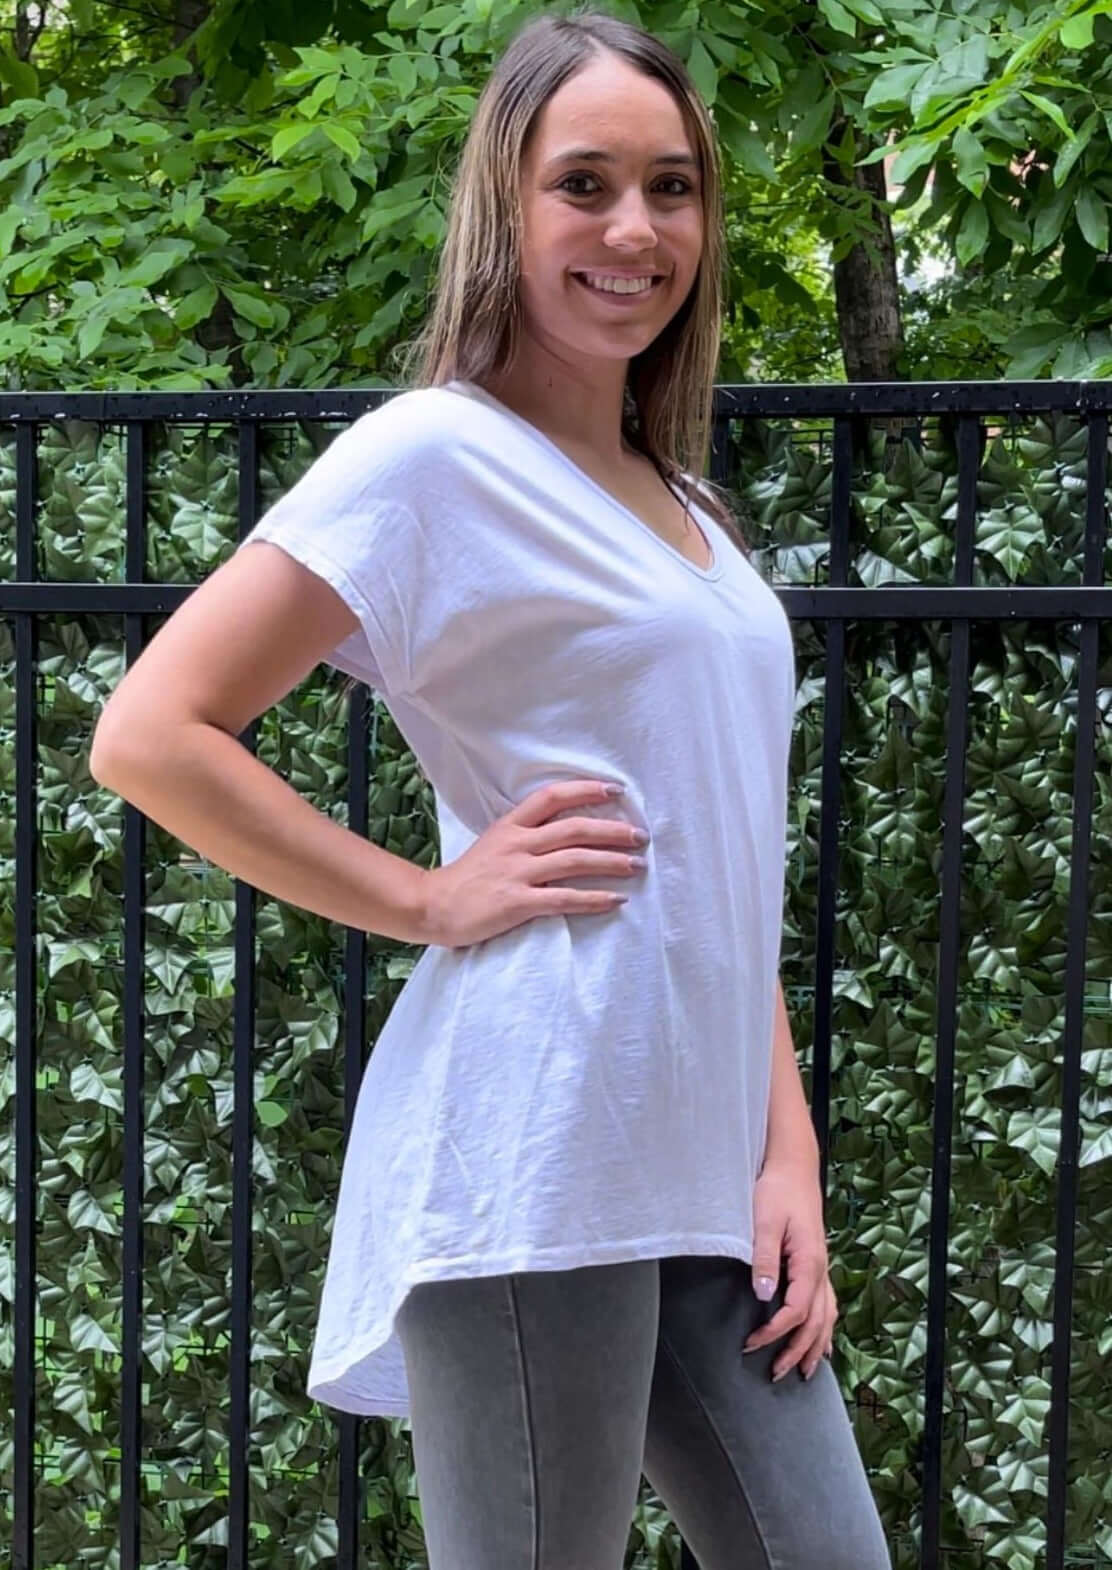 USA Made Women's V-Neck High Low Hem Oversized Lightweight Comfortable Fabric Tee in White | Classy Cozy Cool Women's Made in America Clothing Boutique